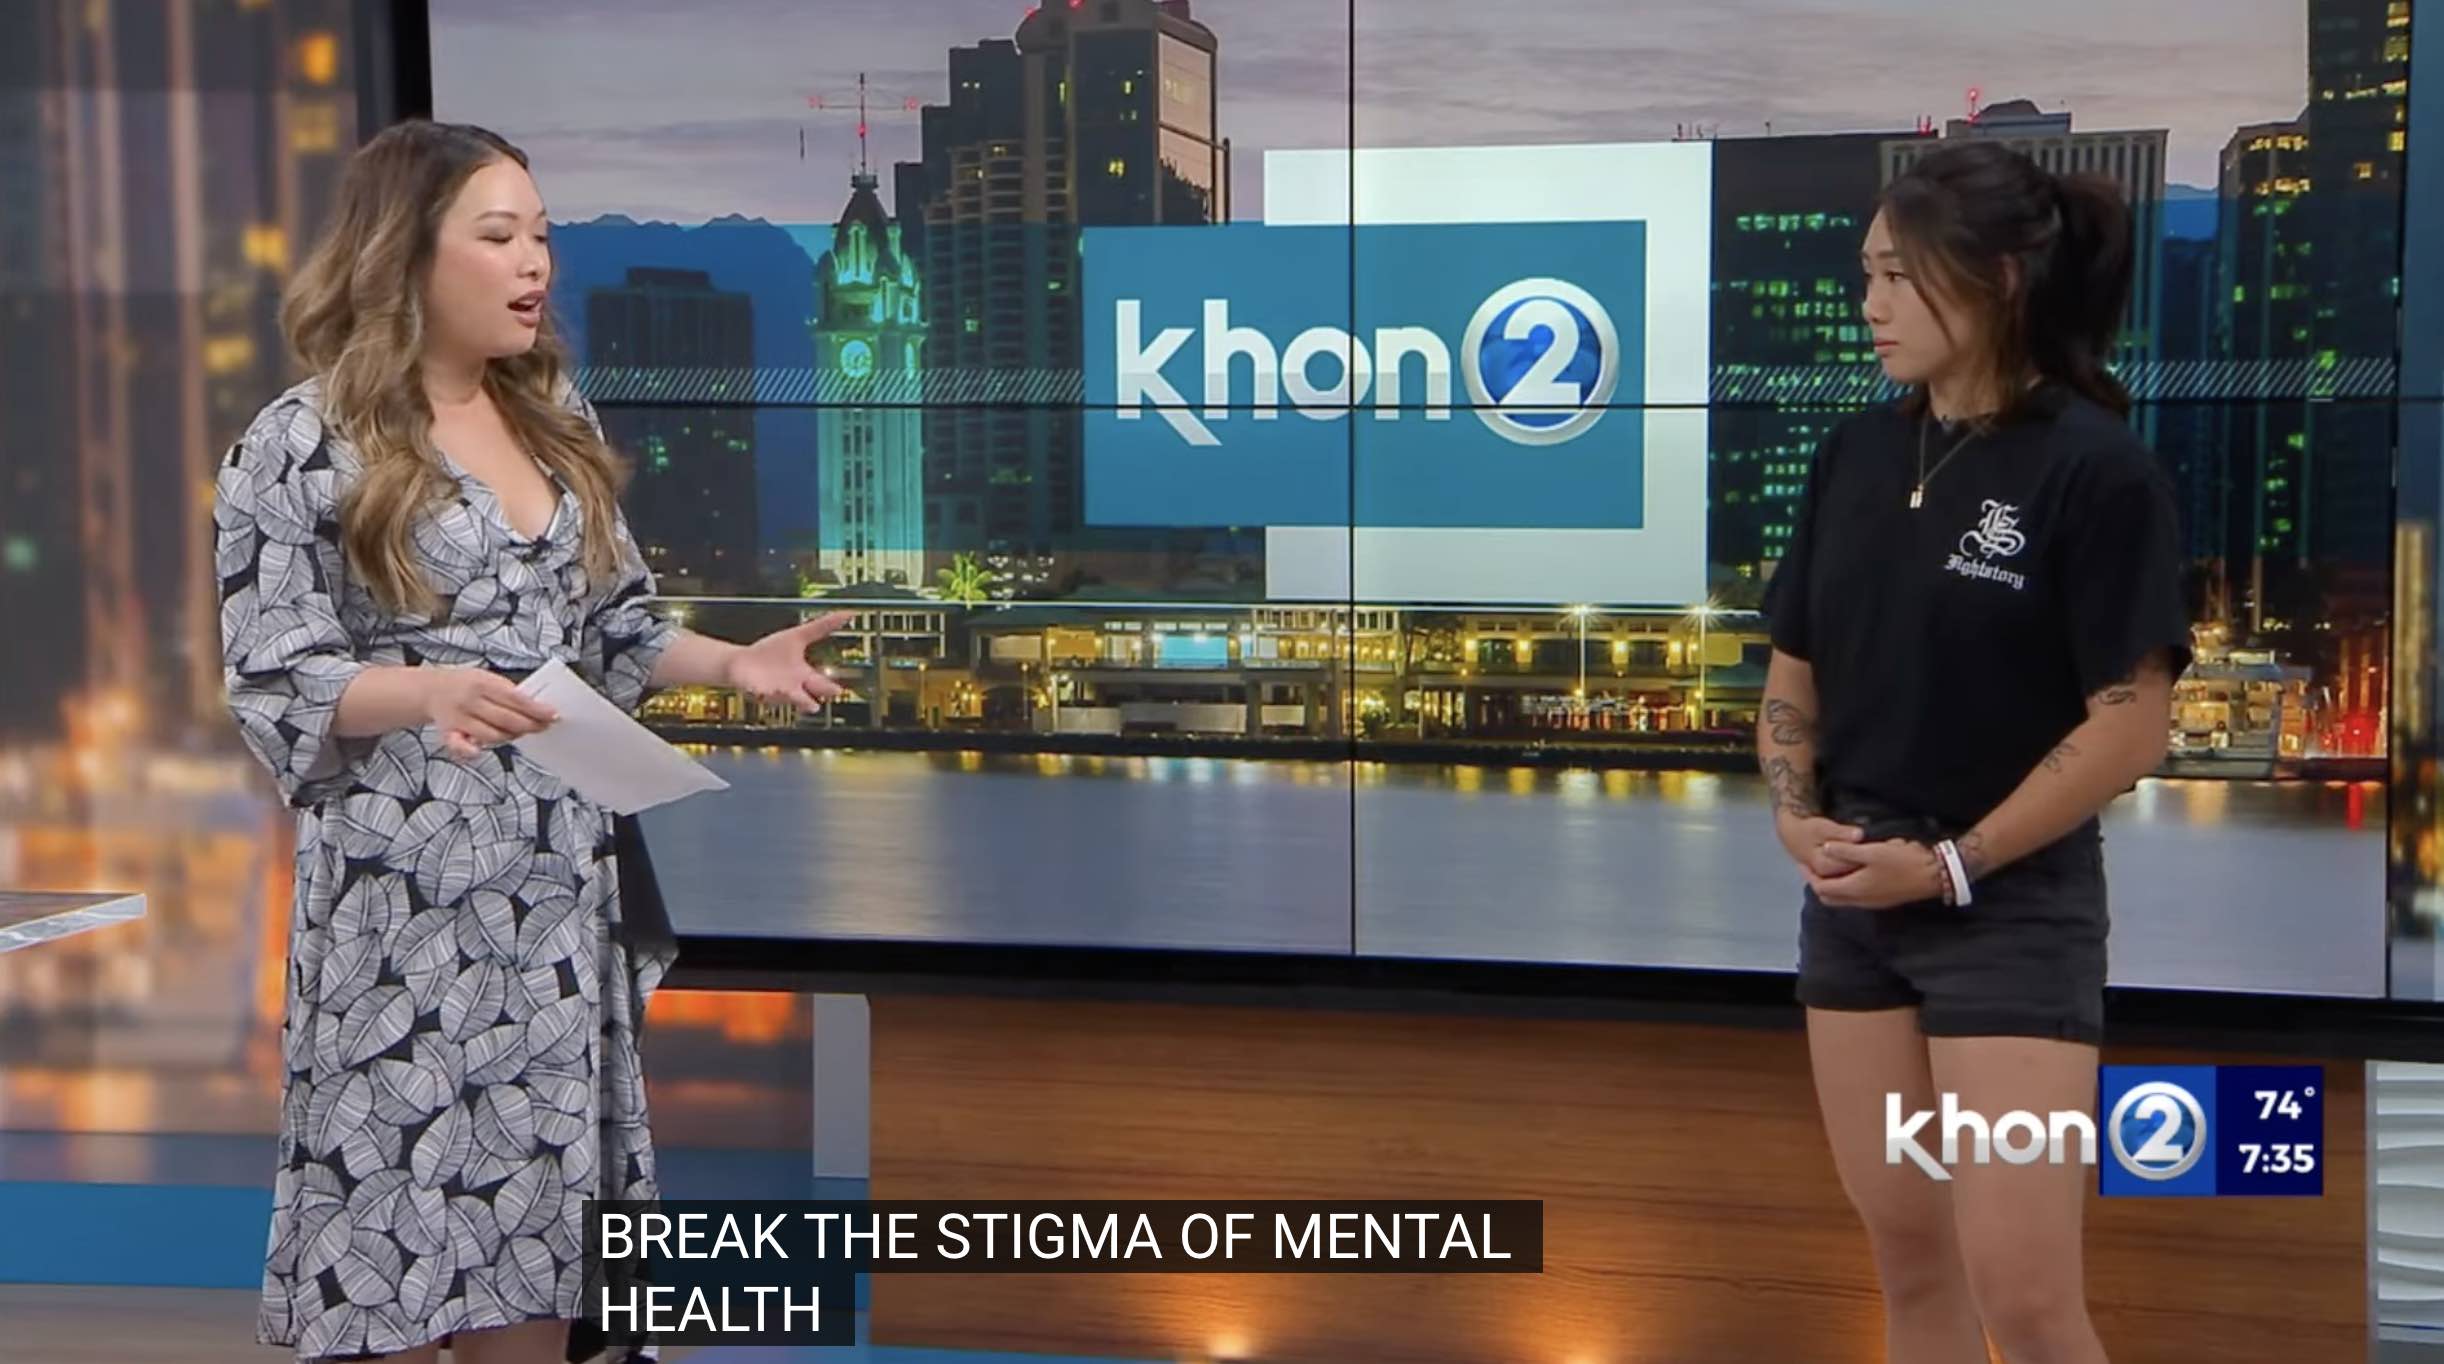 Screen shot of interview with MMA Champion Angela Lee Pucci breaks mental health stigma with FightStory nonprofit